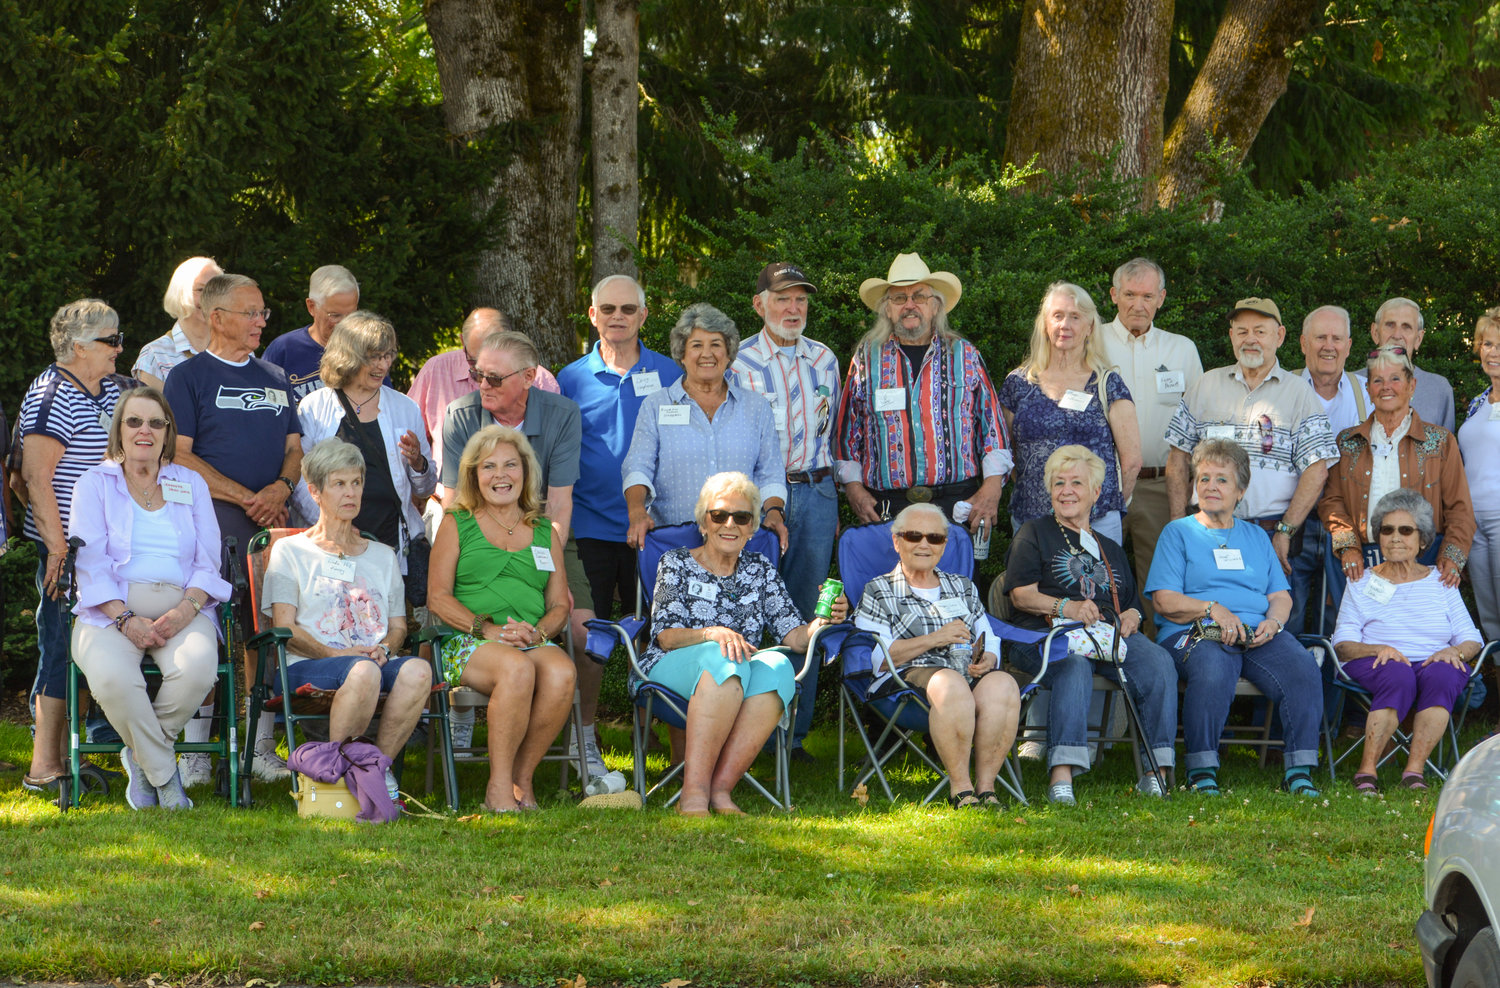 About 70 members of Battle Ground High School’s class of 1960 gathered on Aug. 18 at Kiwanis Park for a reunion.